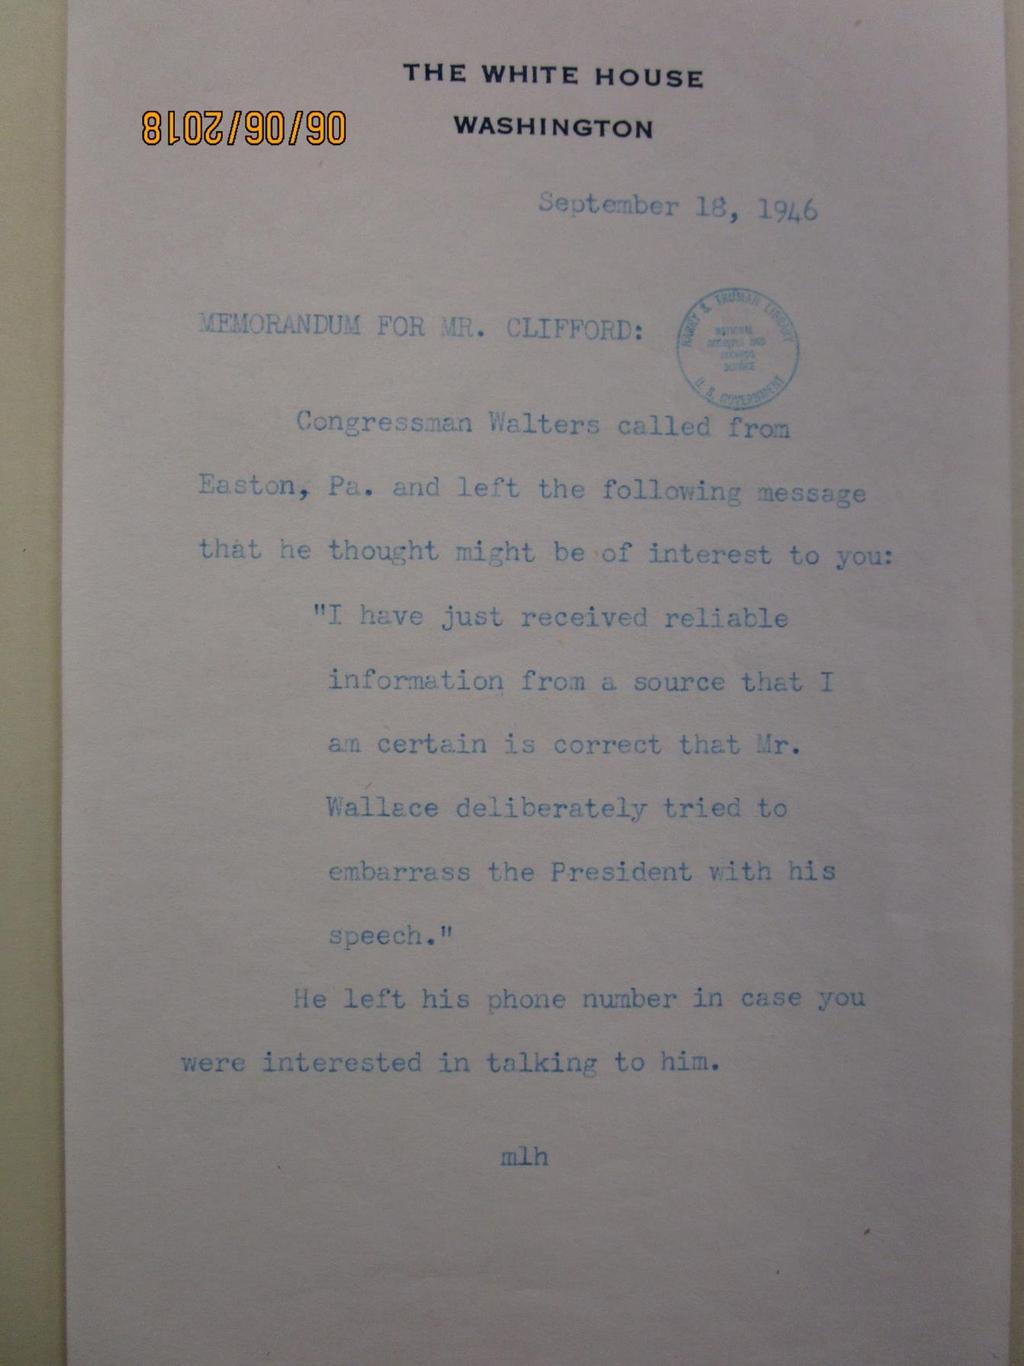 Source 2 Memo to Mr. Clifford. September 18, 1946.